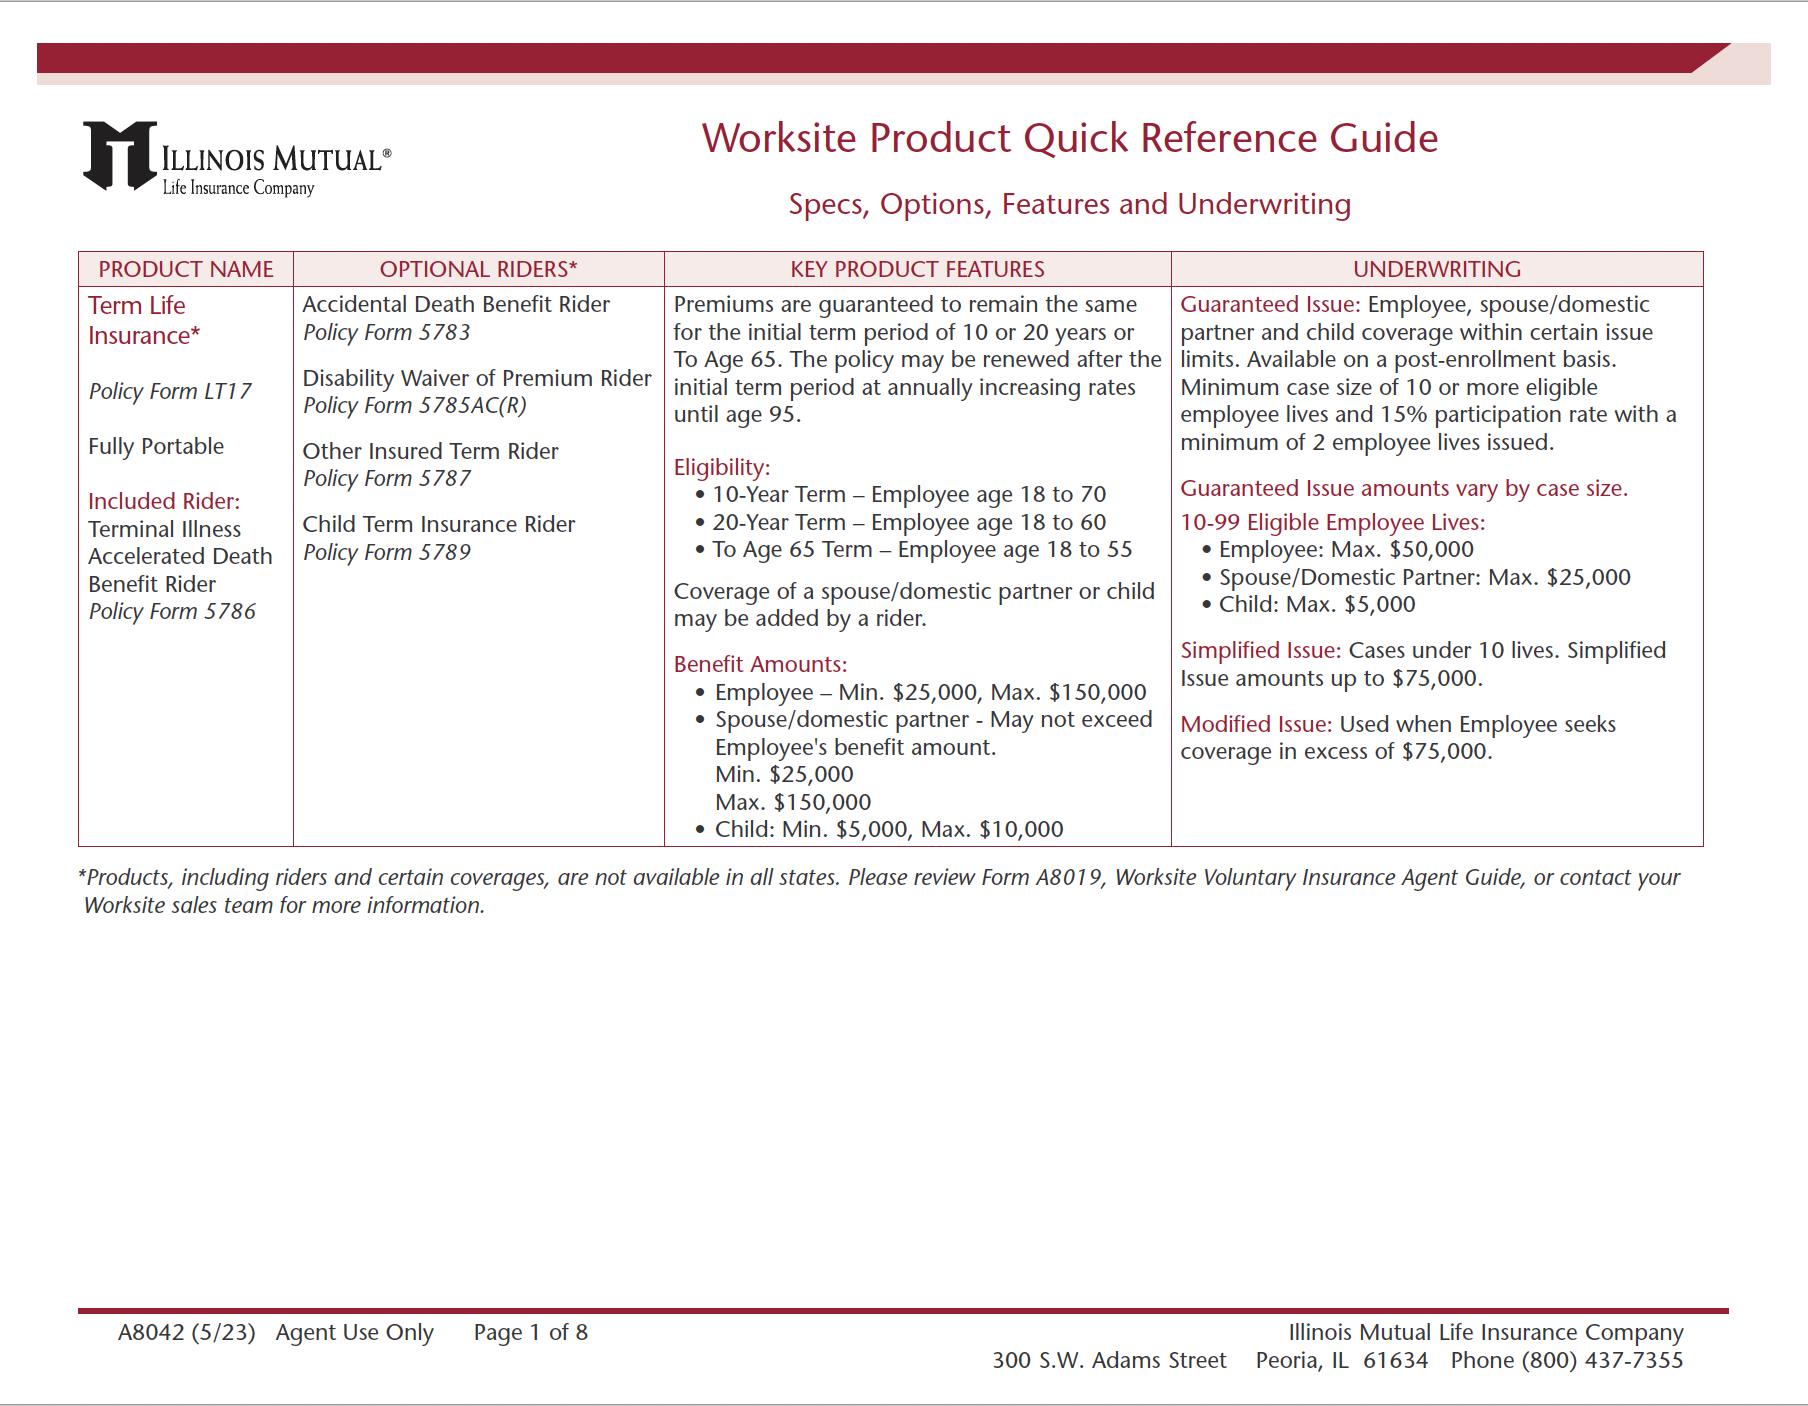 image of worksite product quick reference guide A8042